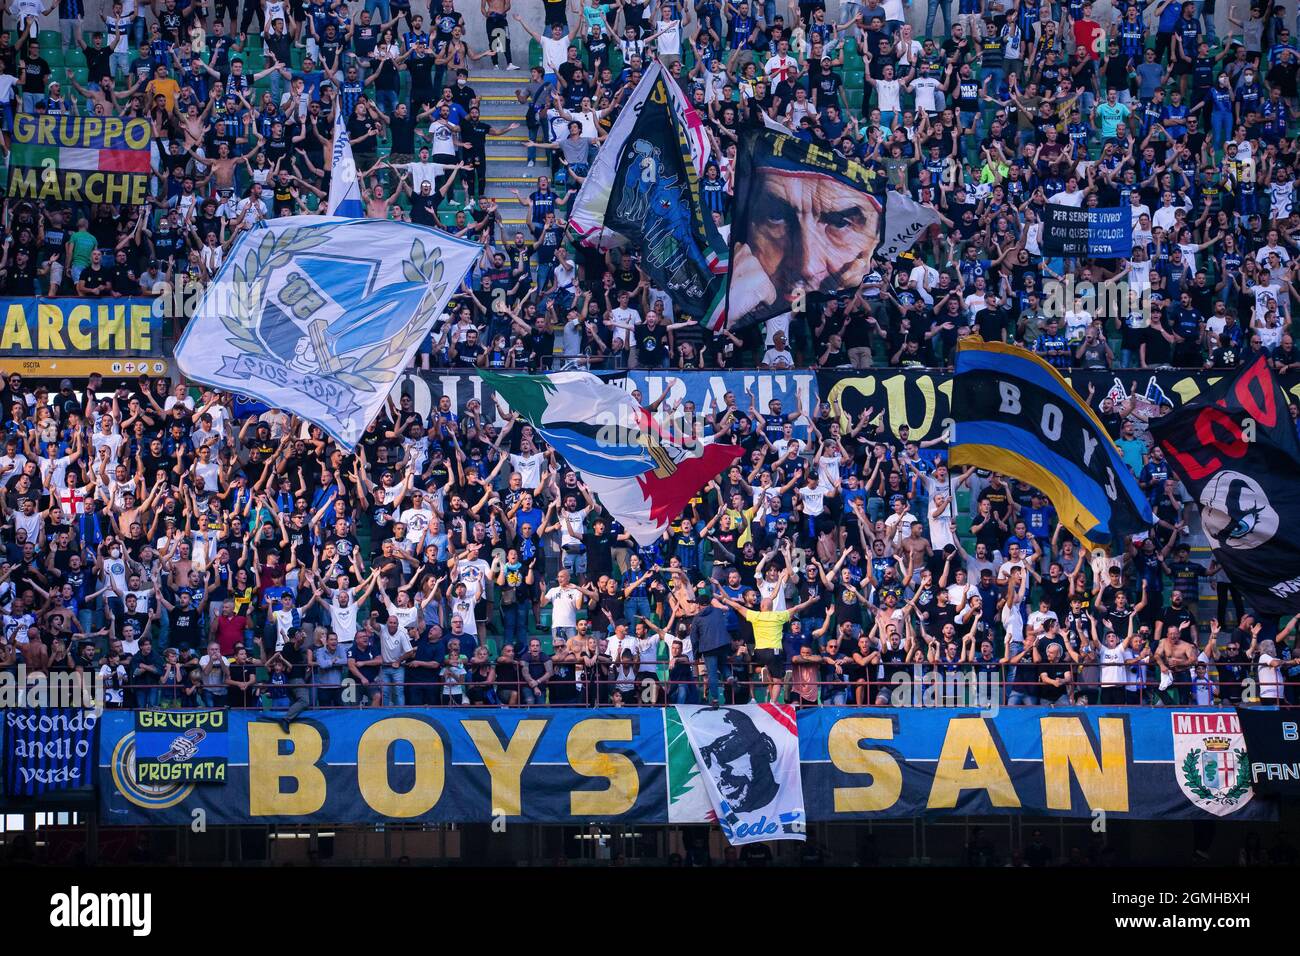 Inter Curva Issues Warning and Lists Remaining Goals